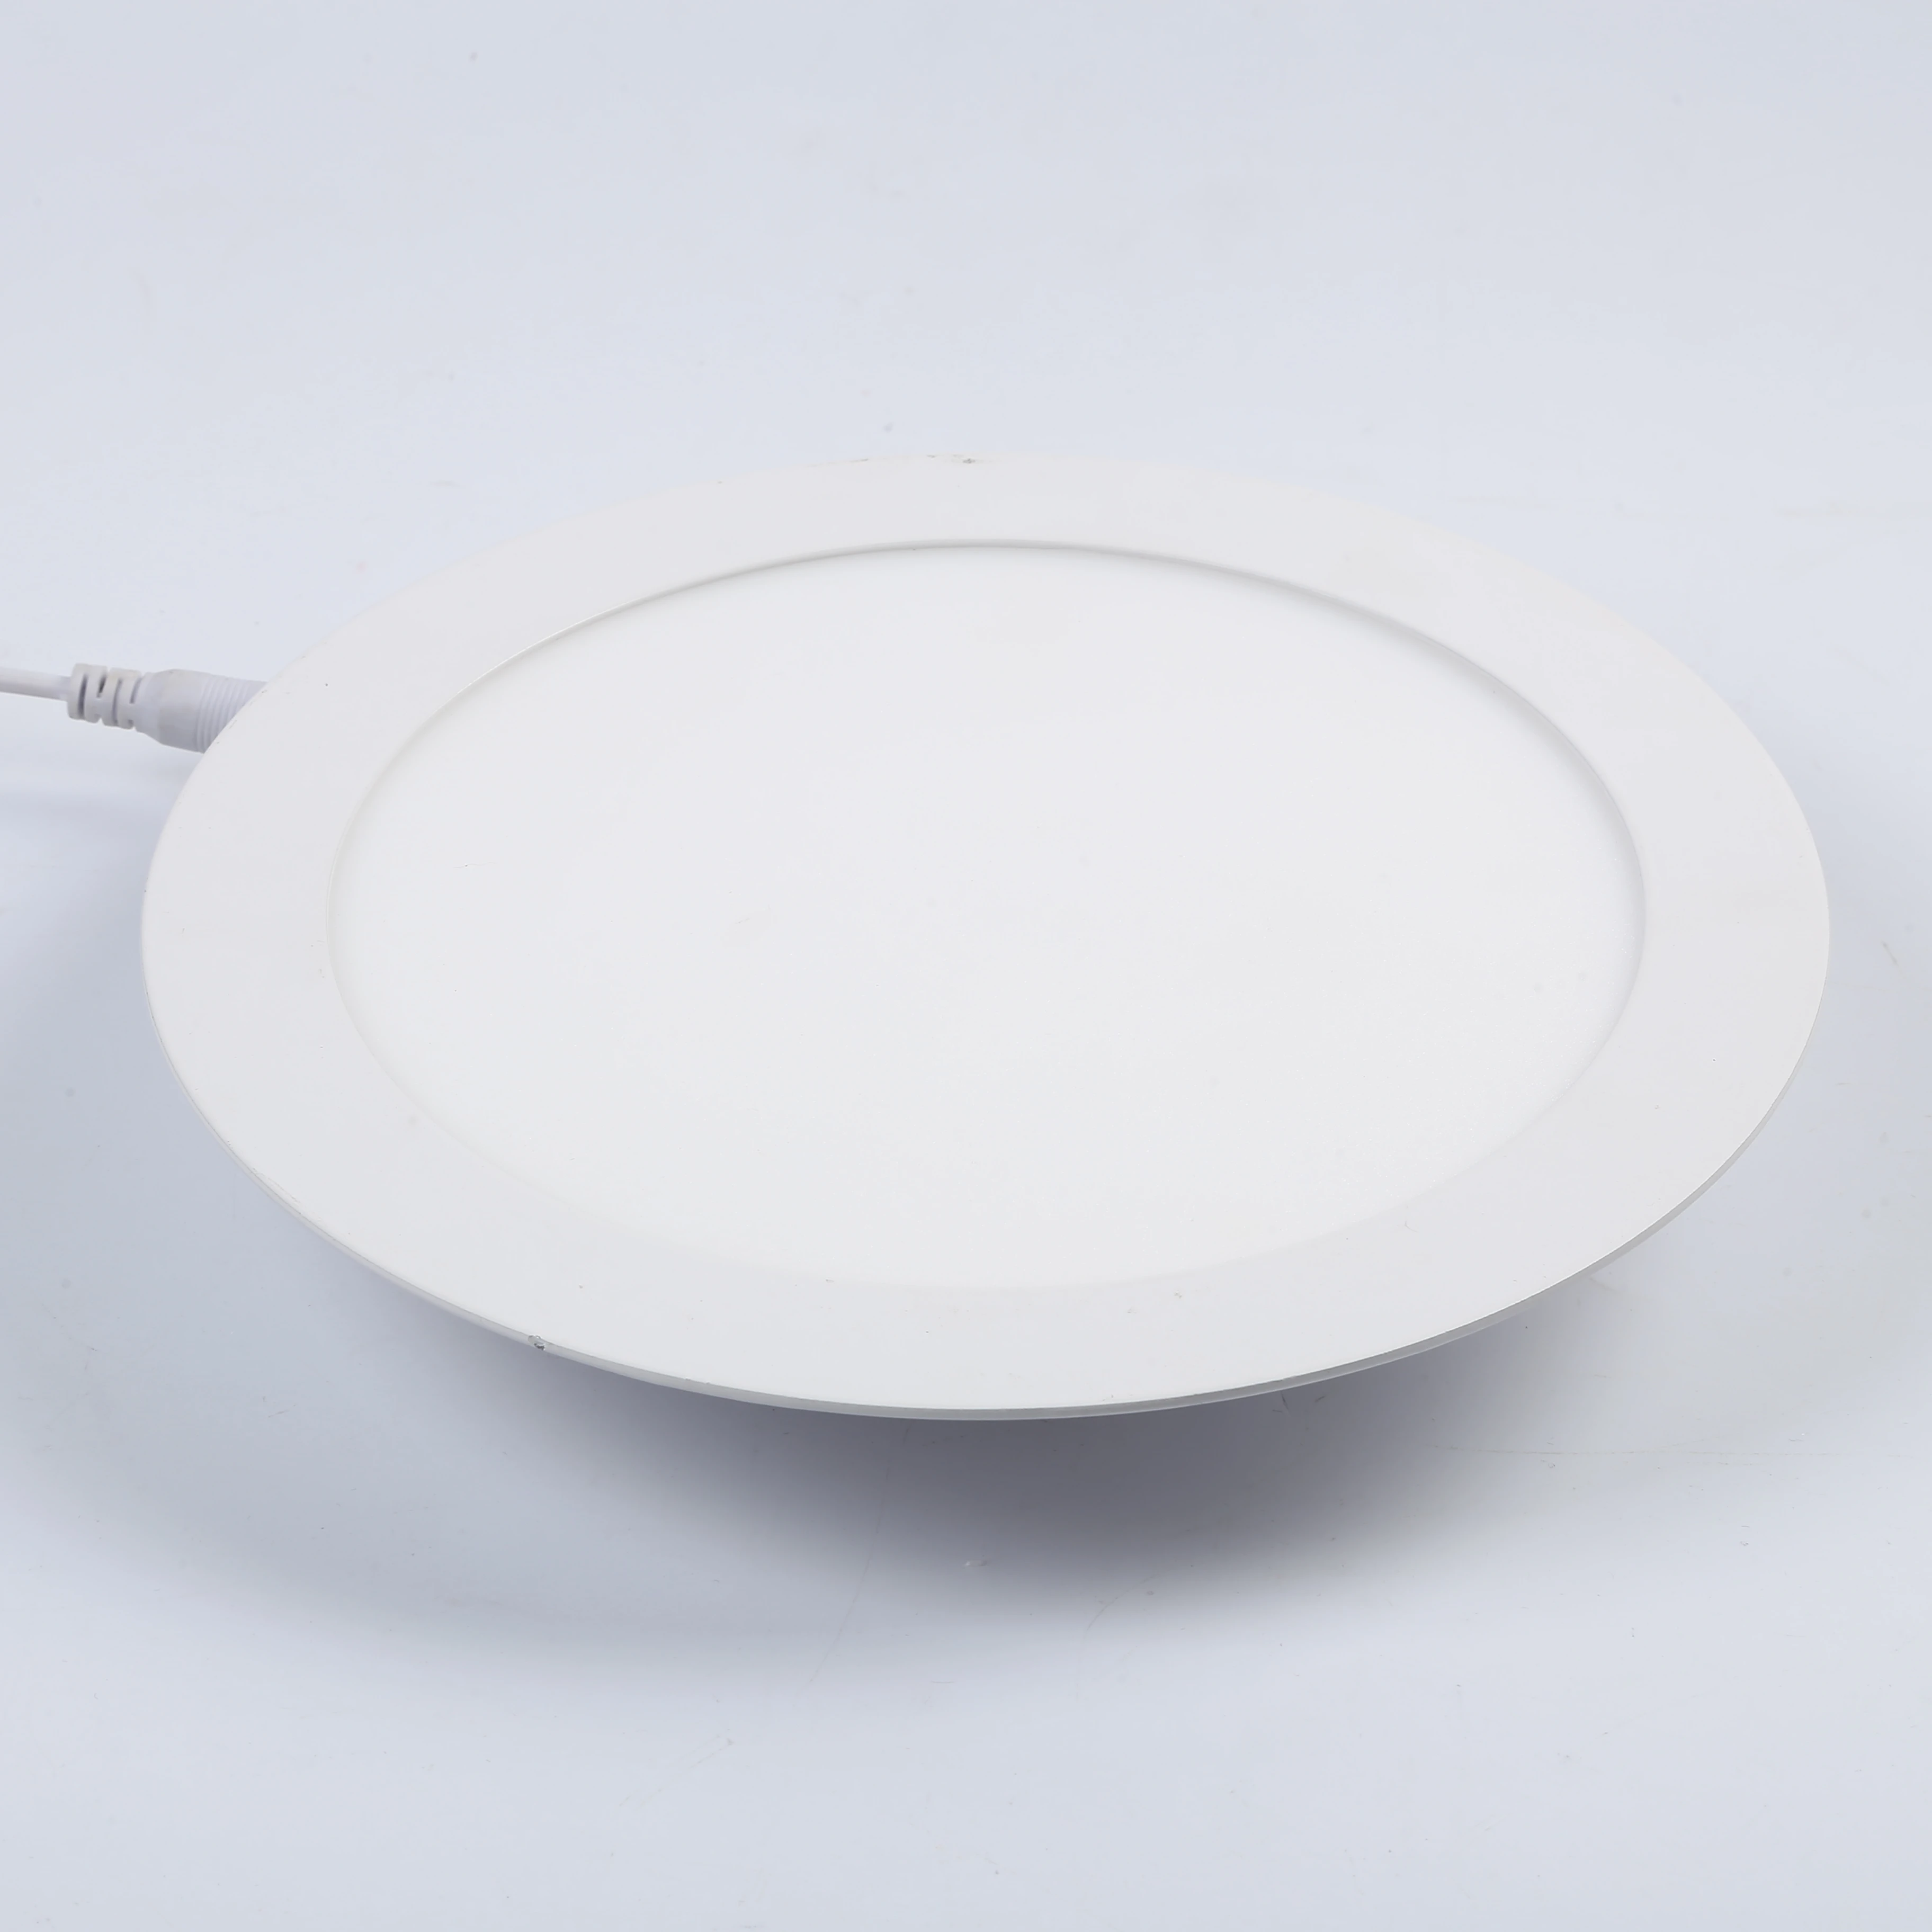 Cheap price 2 Years Warranty AC85-265V Isolated driver Round Ultra Slim Led Panel Light 6W SKD